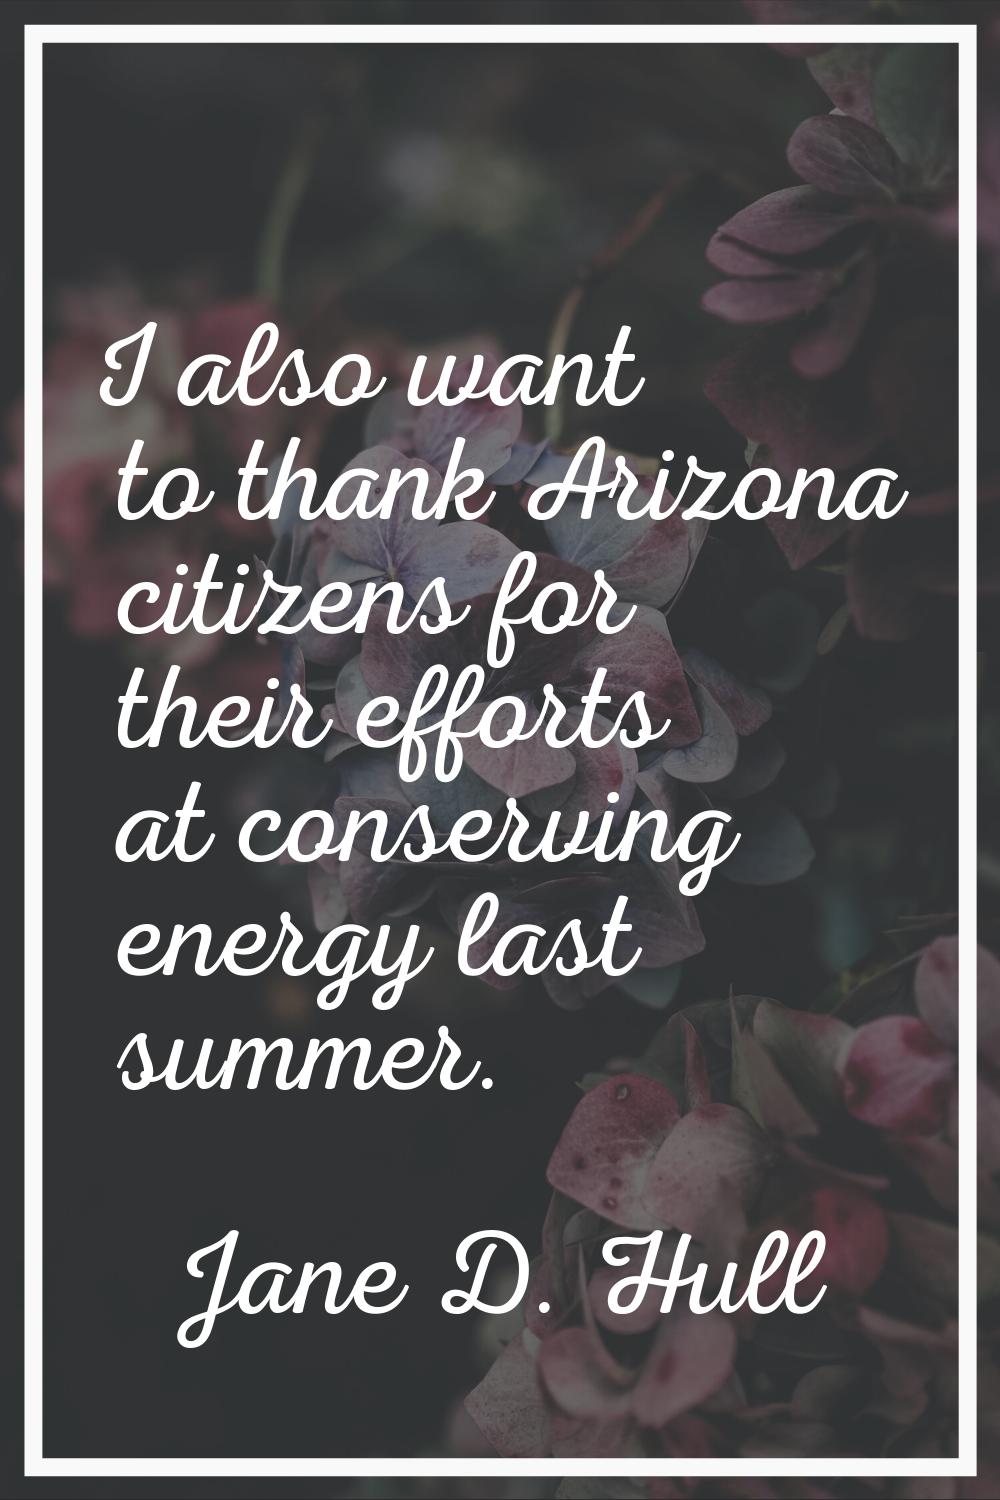 I also want to thank Arizona citizens for their efforts at conserving energy last summer.